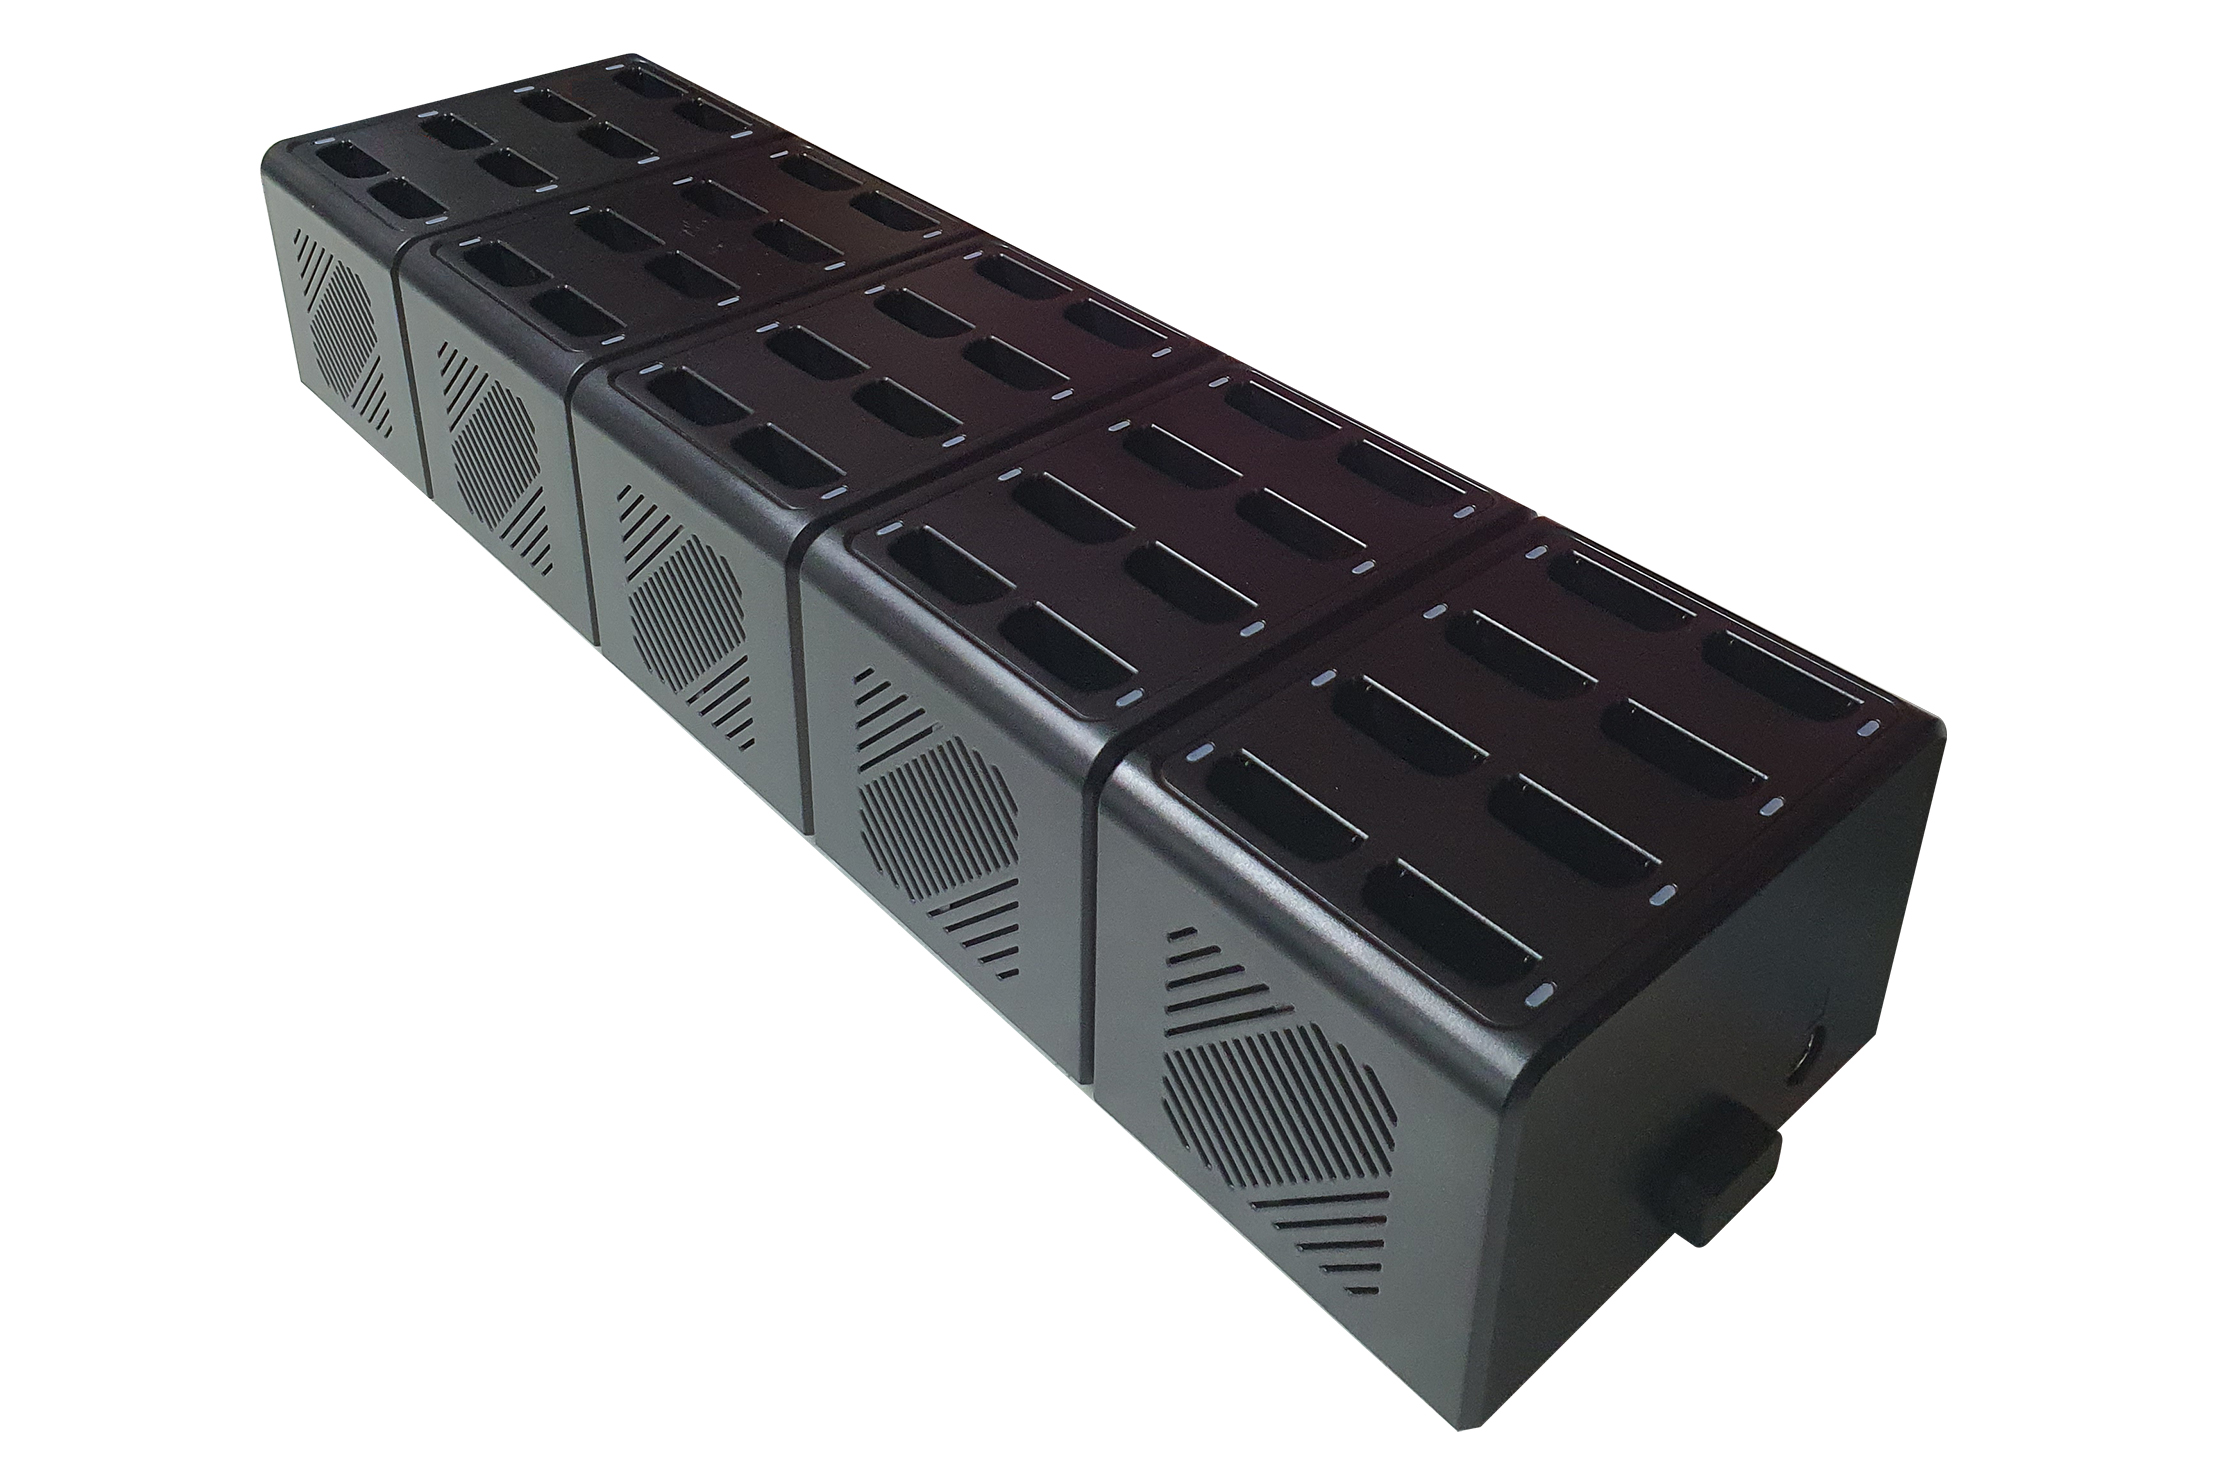 40 Slot Battery Charger